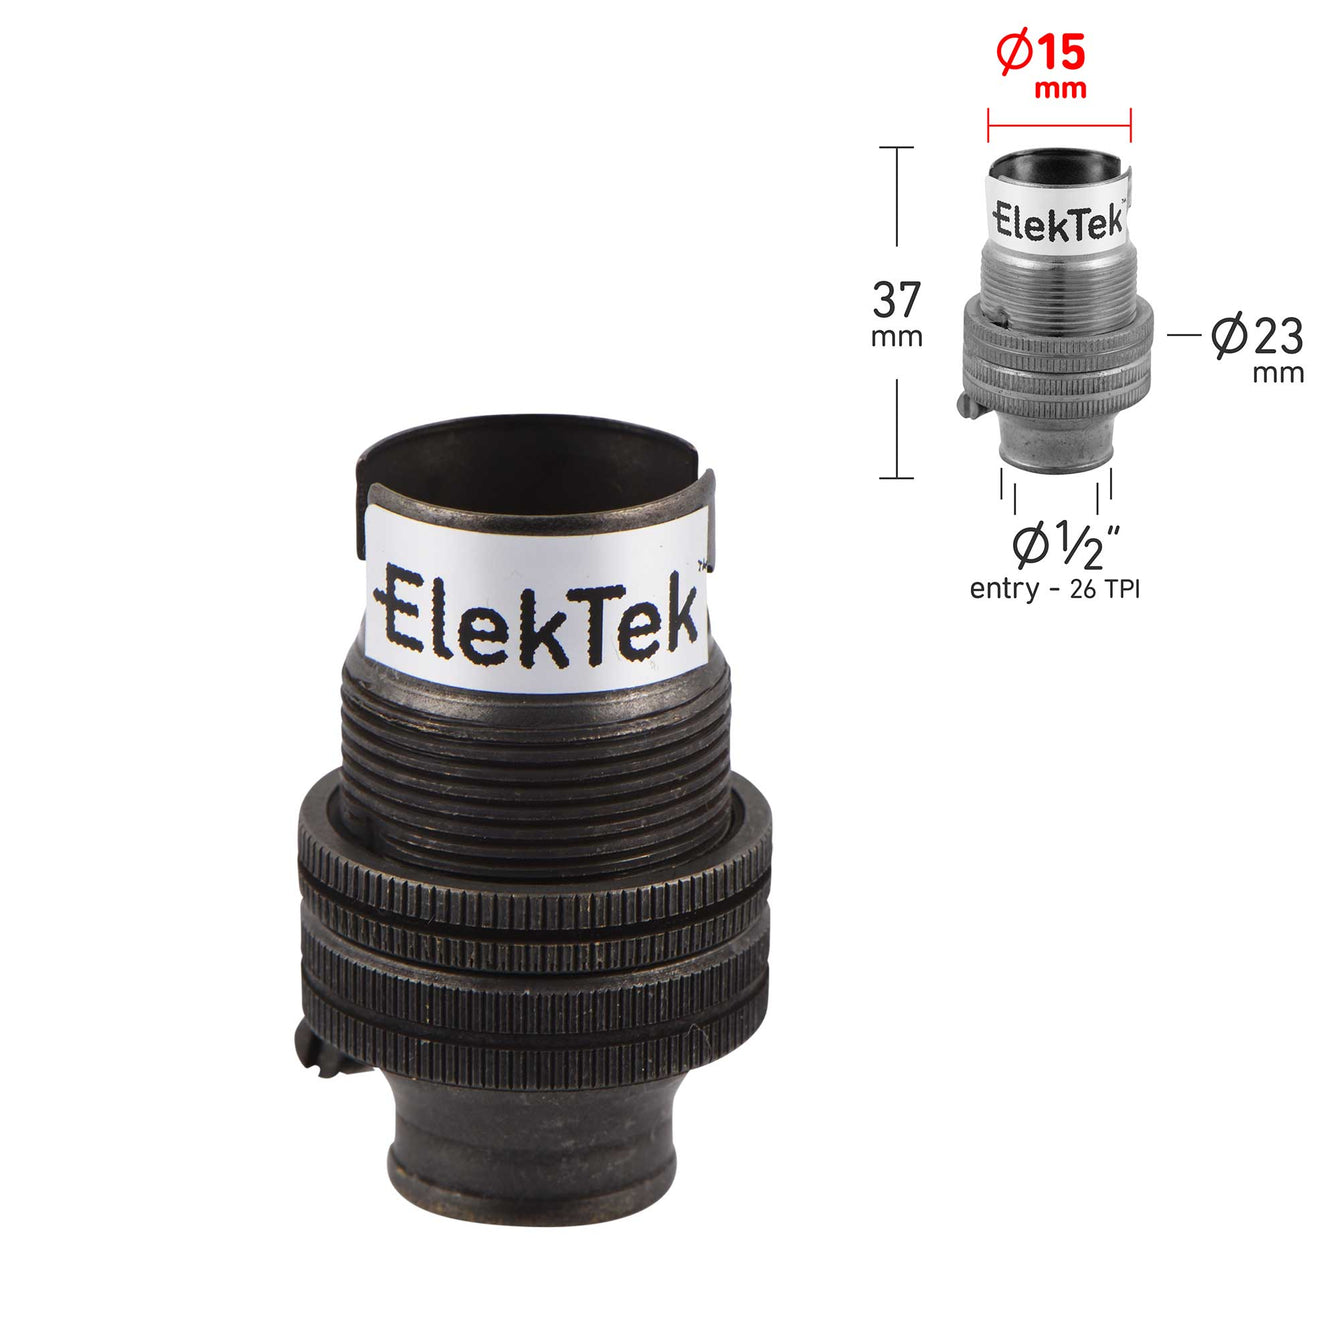 ElekTek Lamp Holder 10mm or Half Inch Entry Miniature Small Bayonet Cap SBC B15 With Shade Ring Solid Brass - Buy It Better 